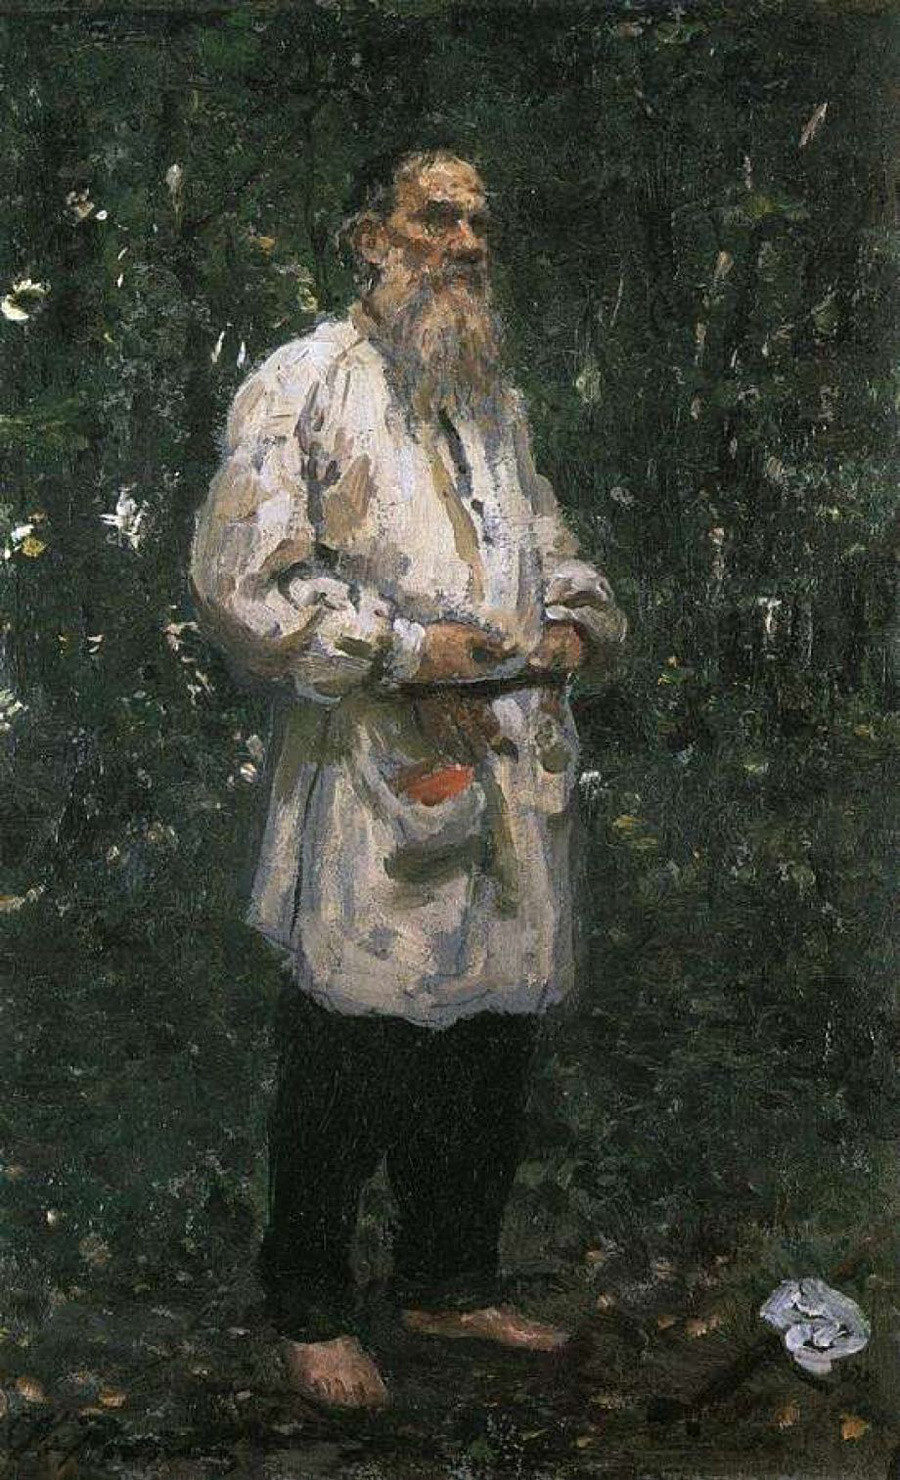 Leo Tolstoy Barefoot. Study for a portrait of the same title, 1891